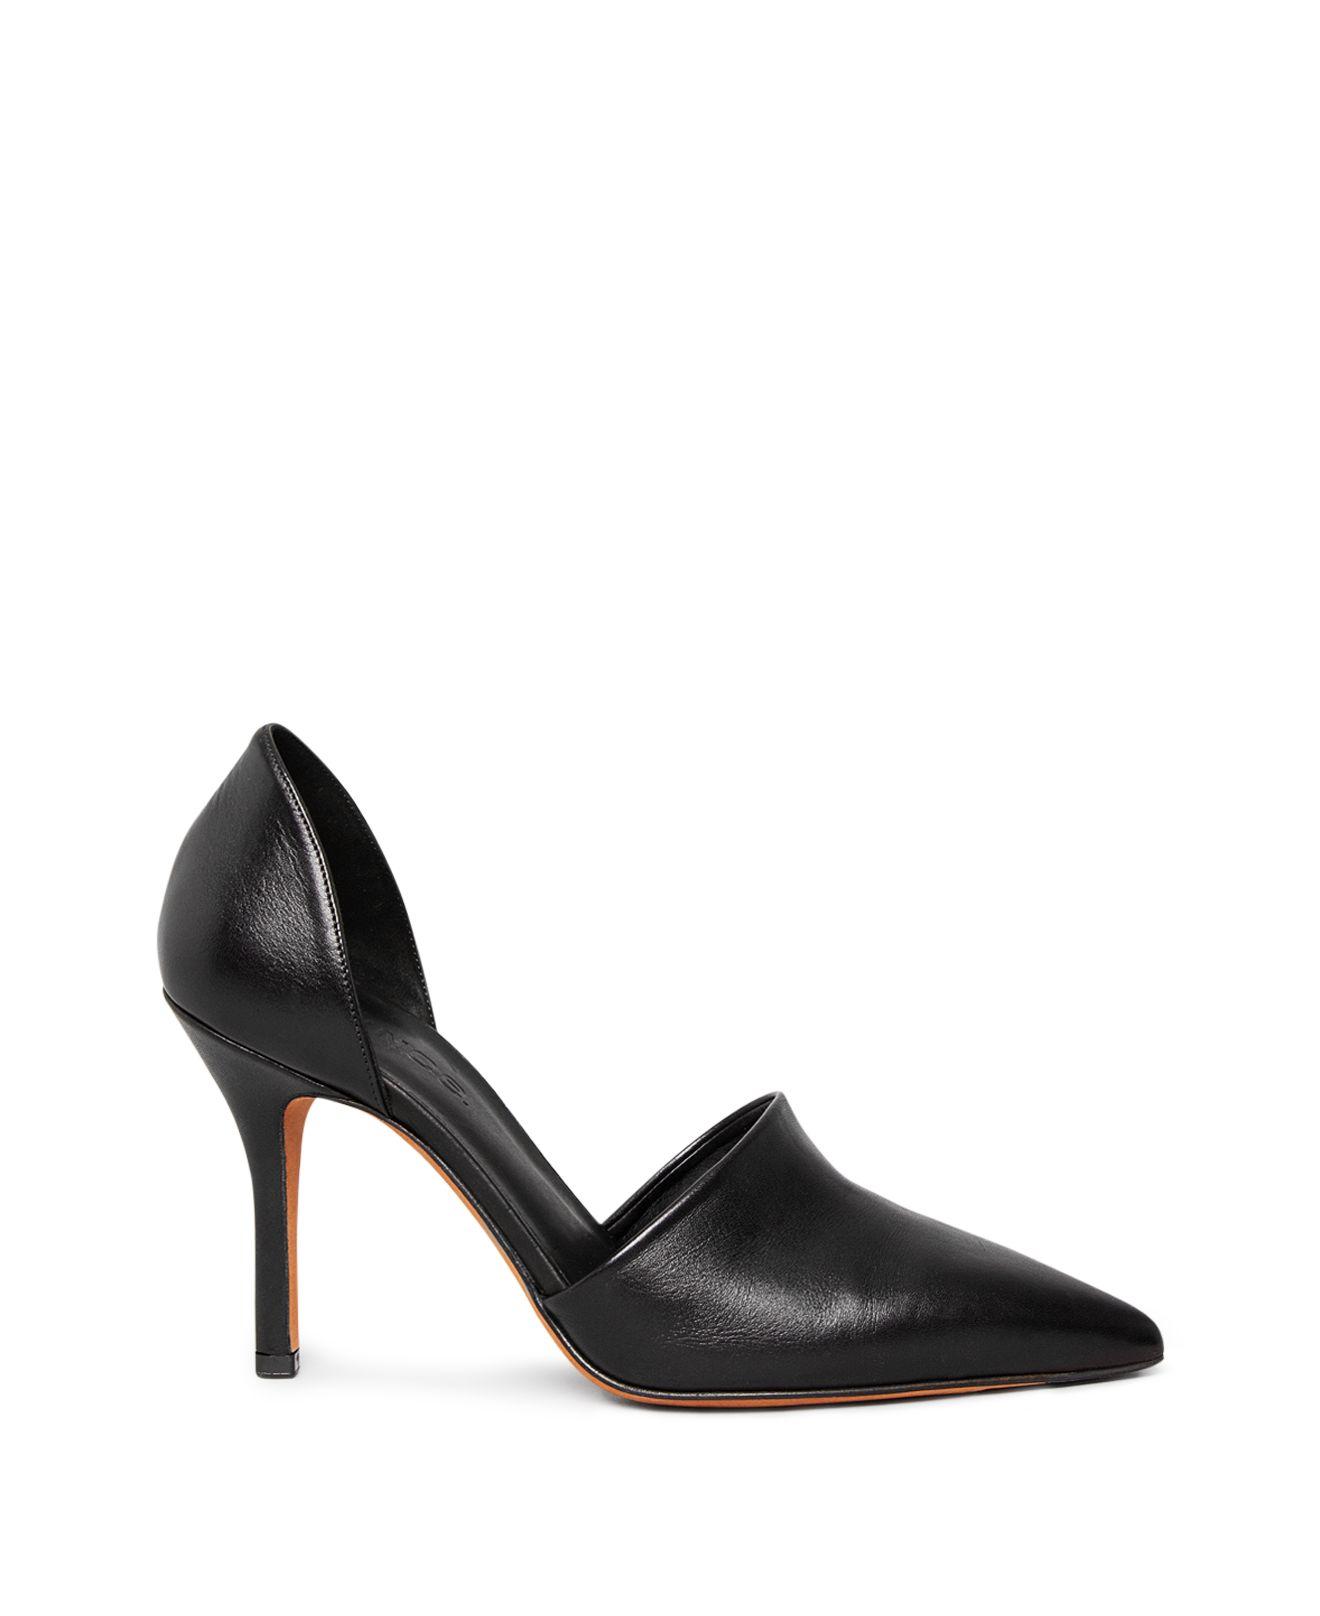 Vince Leather Claire Pointed Toe D'orsay High Heel Pumps in Black - Lyst